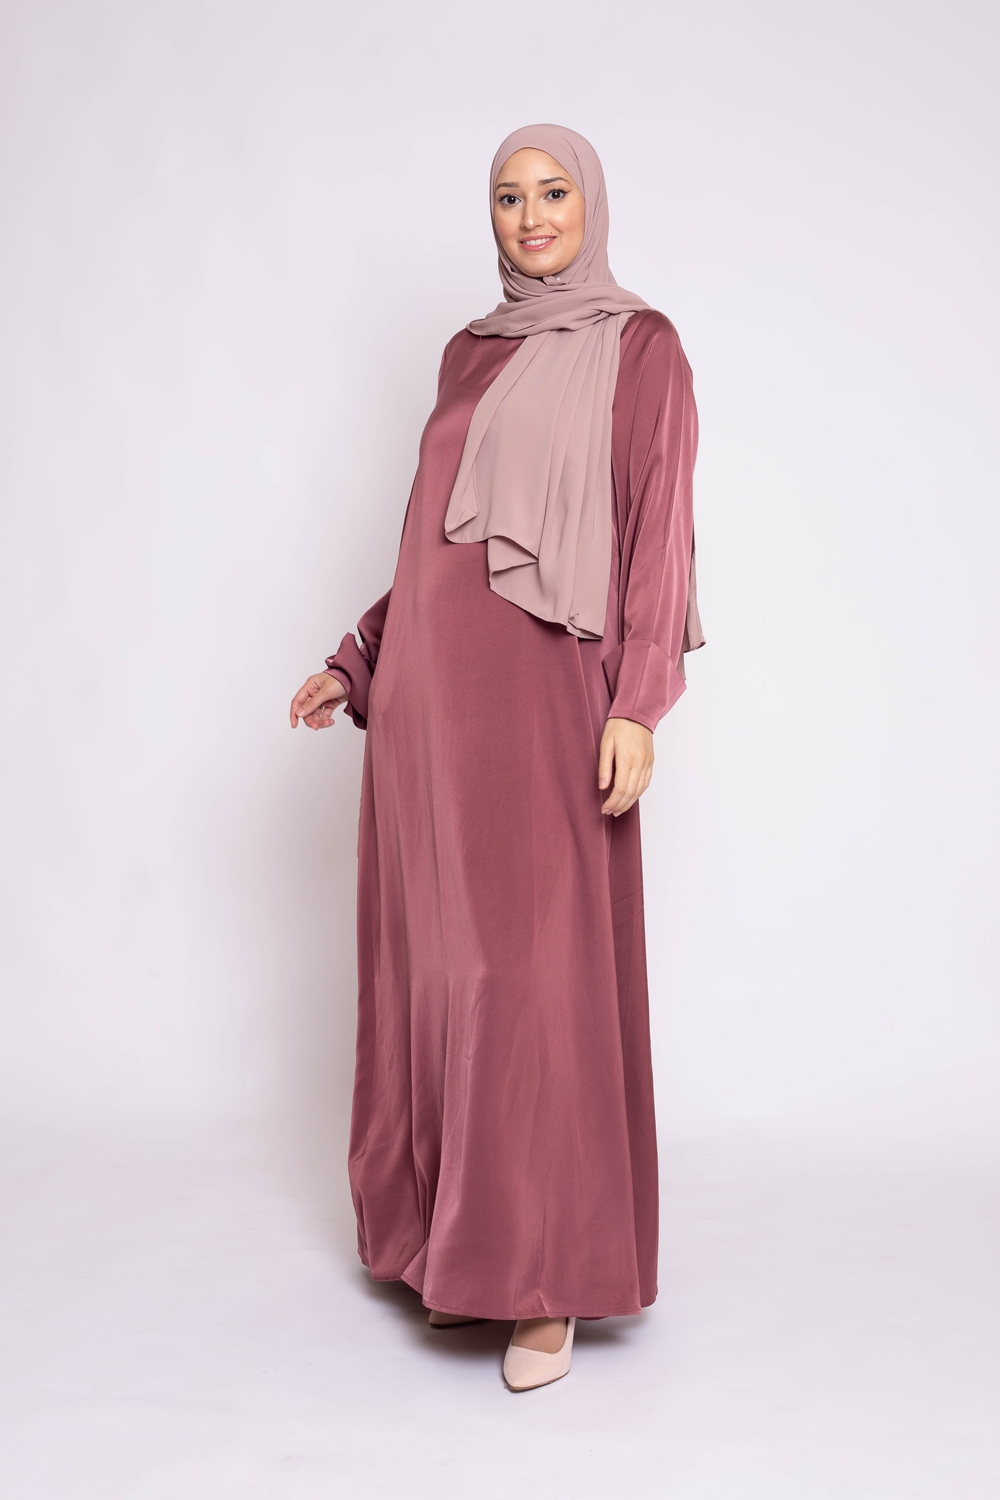 Abaya luxery satiné terre cuite